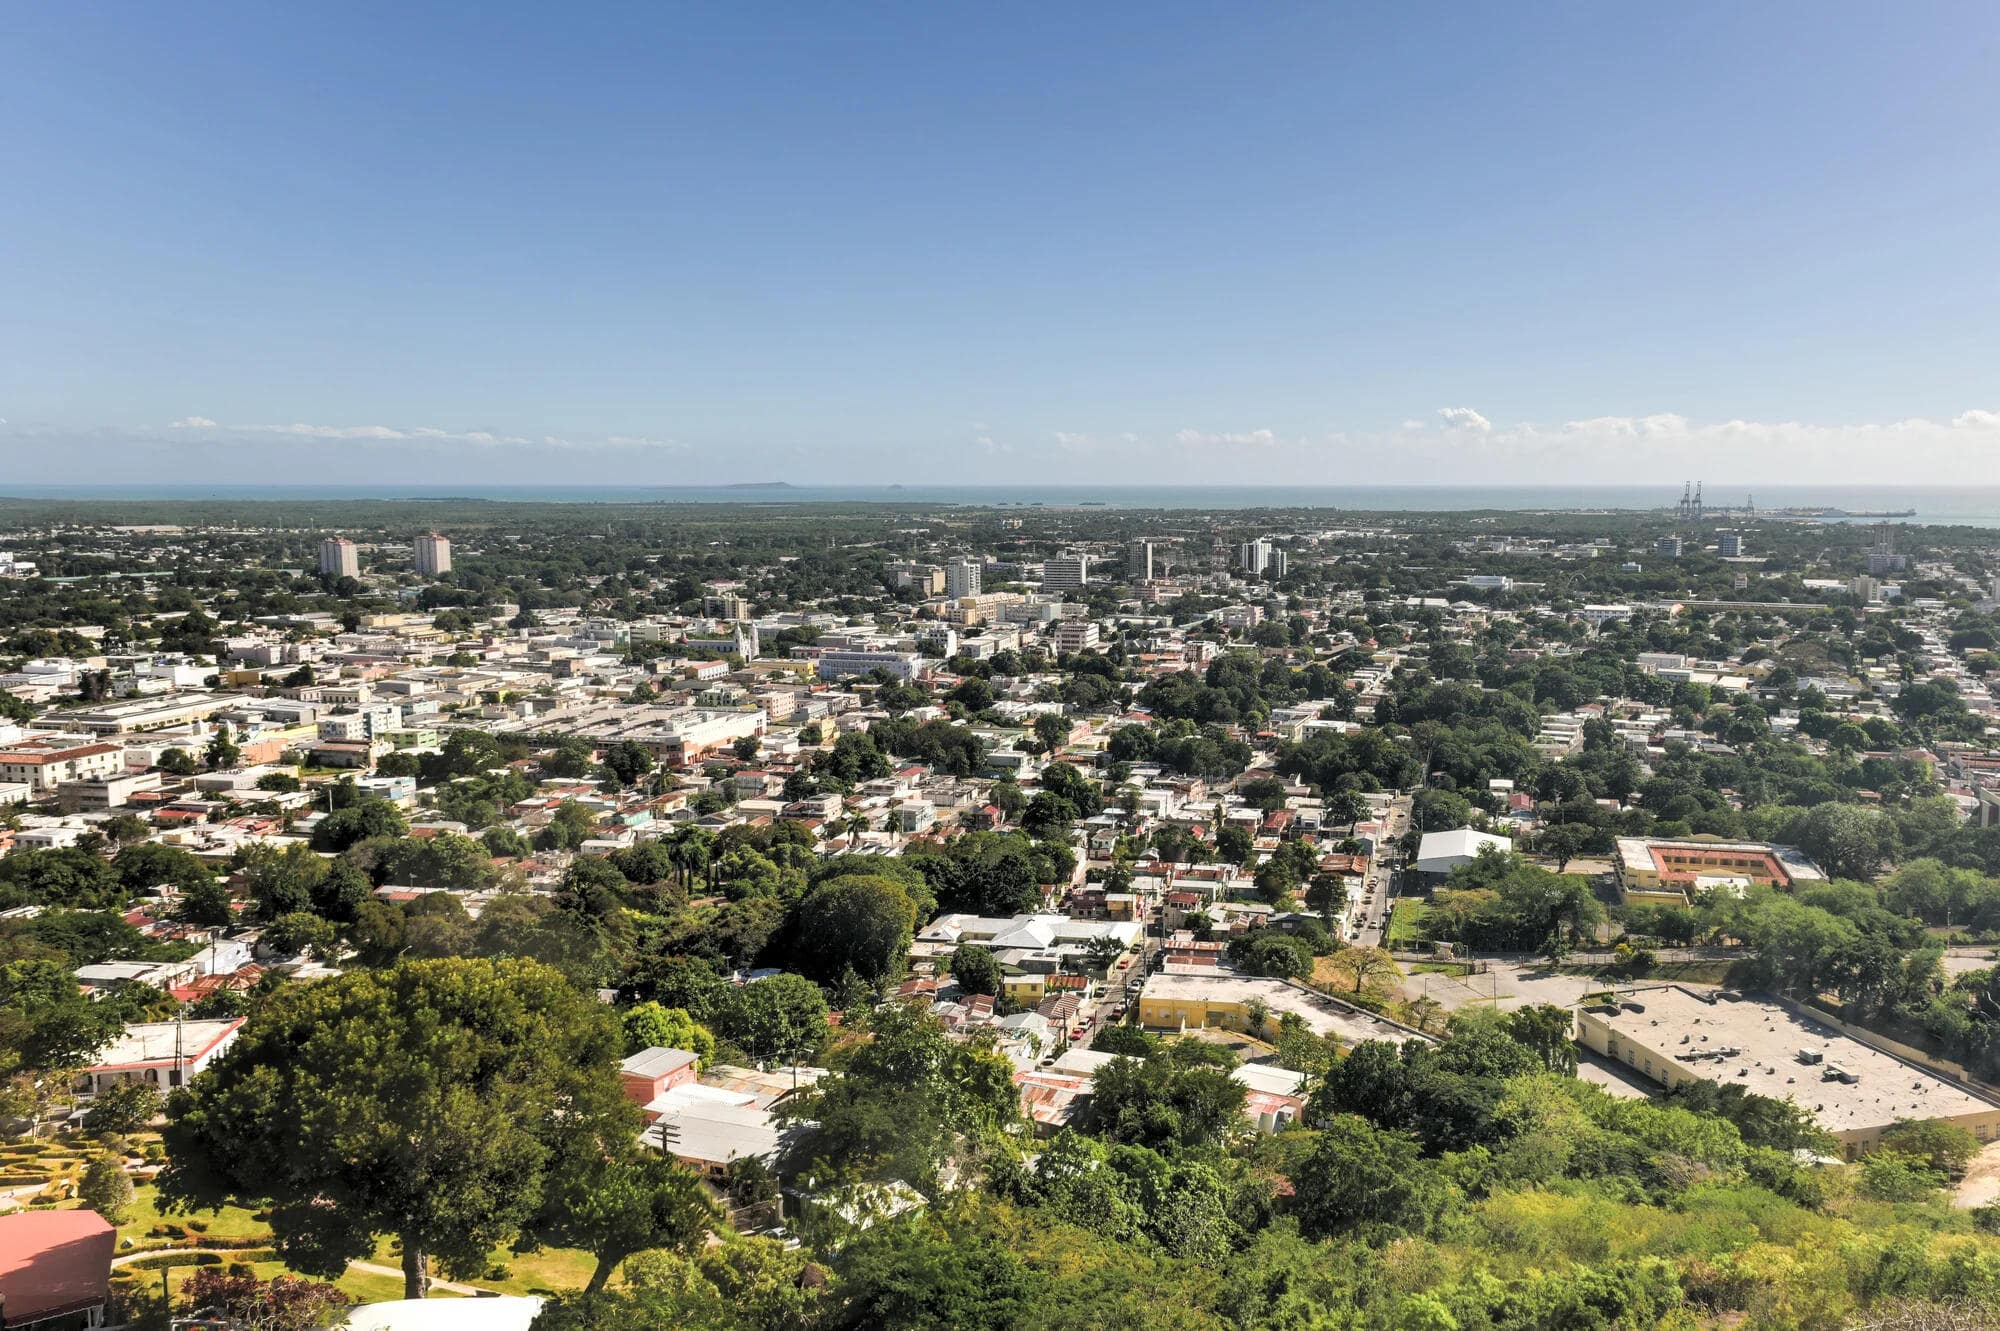 What Does a Leasing-Only Service in Puerto Rico Do?